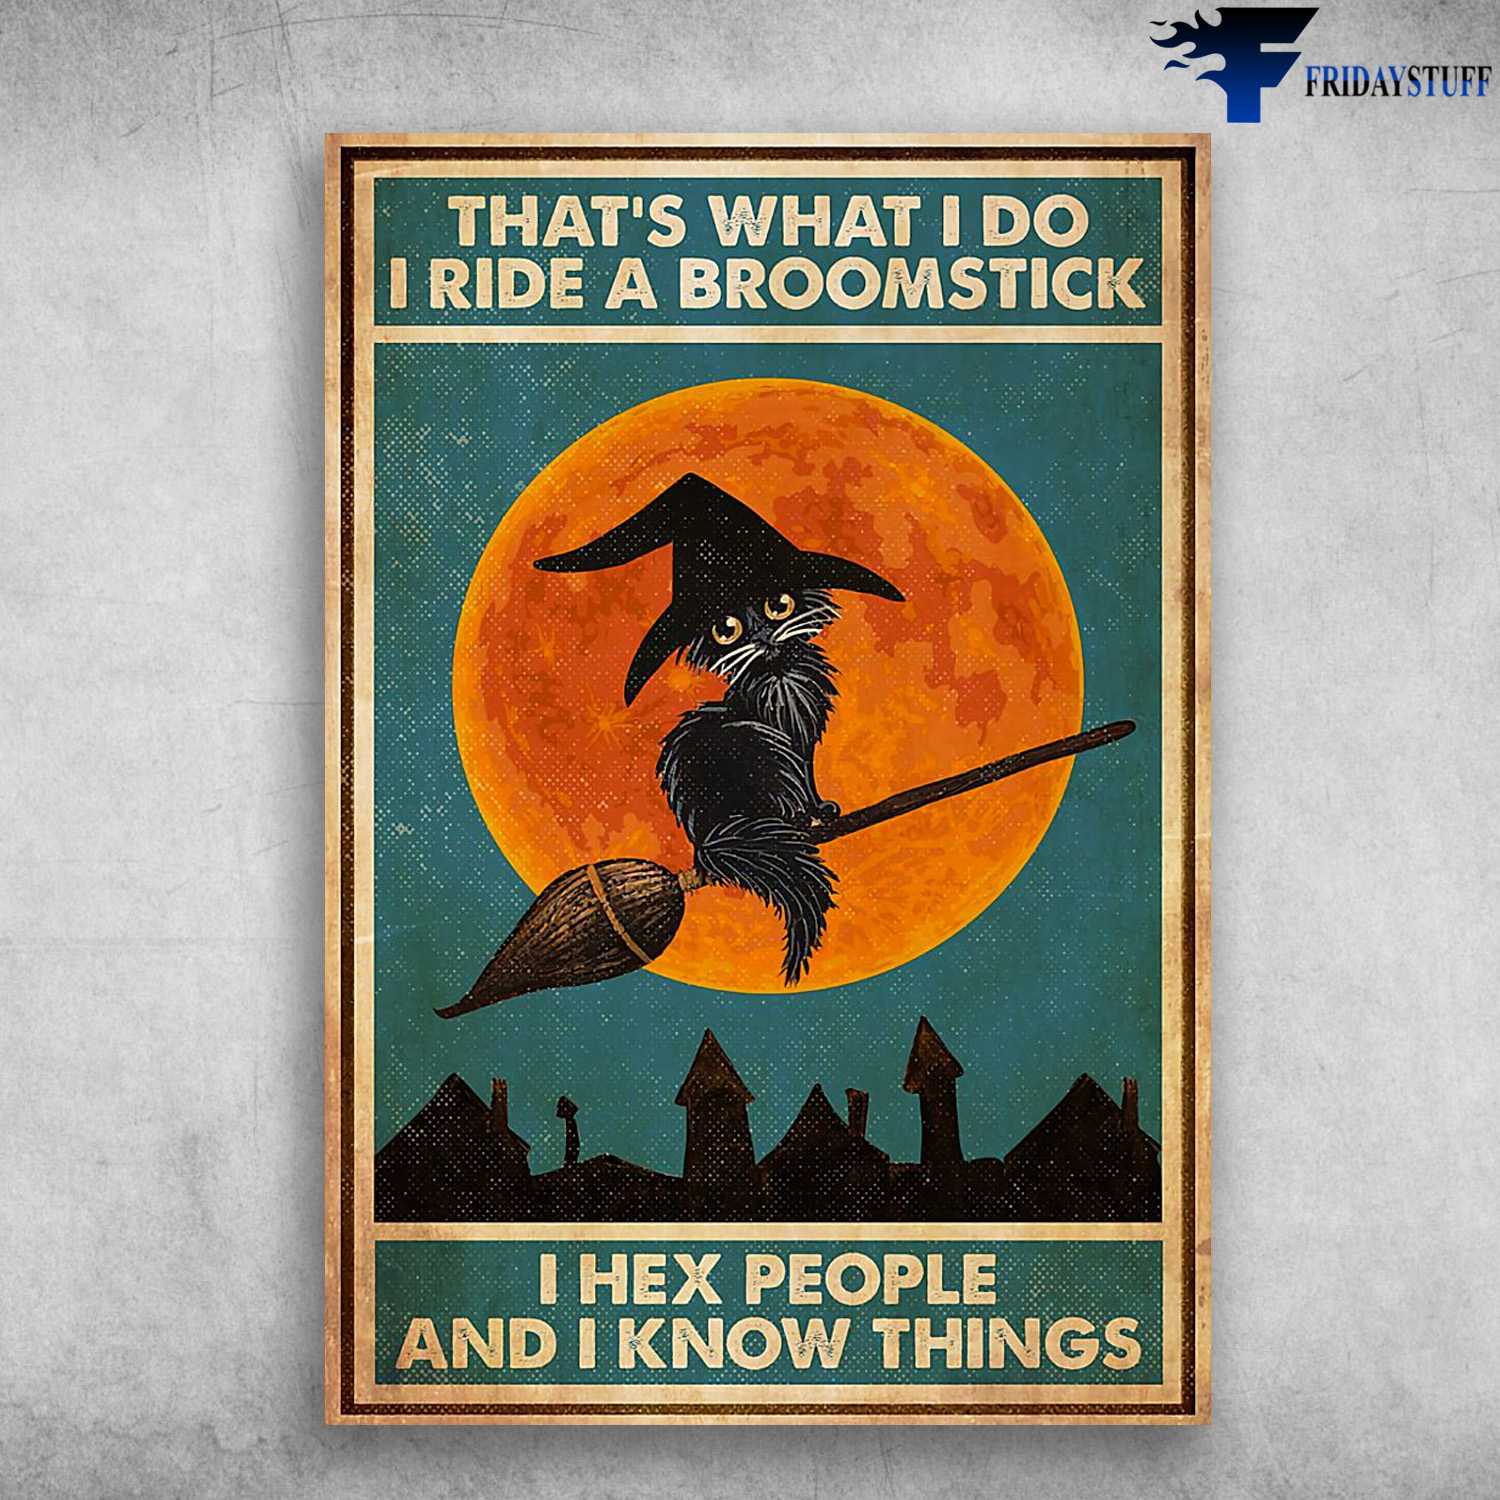 Black Cat, Witch Poster, That's What I Do, I Ride A Broomstick, I Hex People, And I Know Things